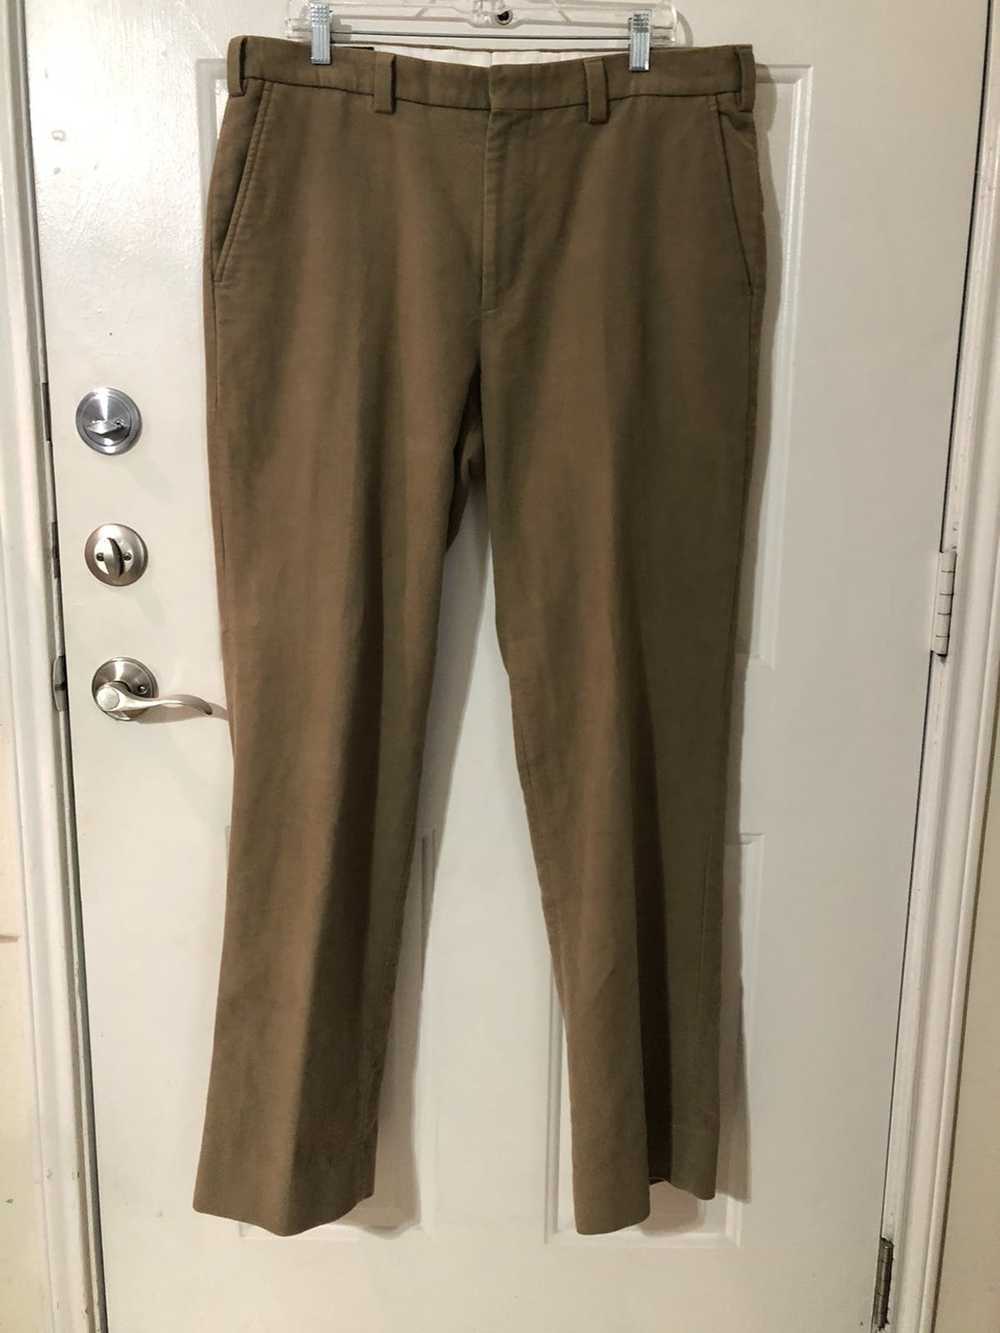 Orvis Flat front Chino style - image 1